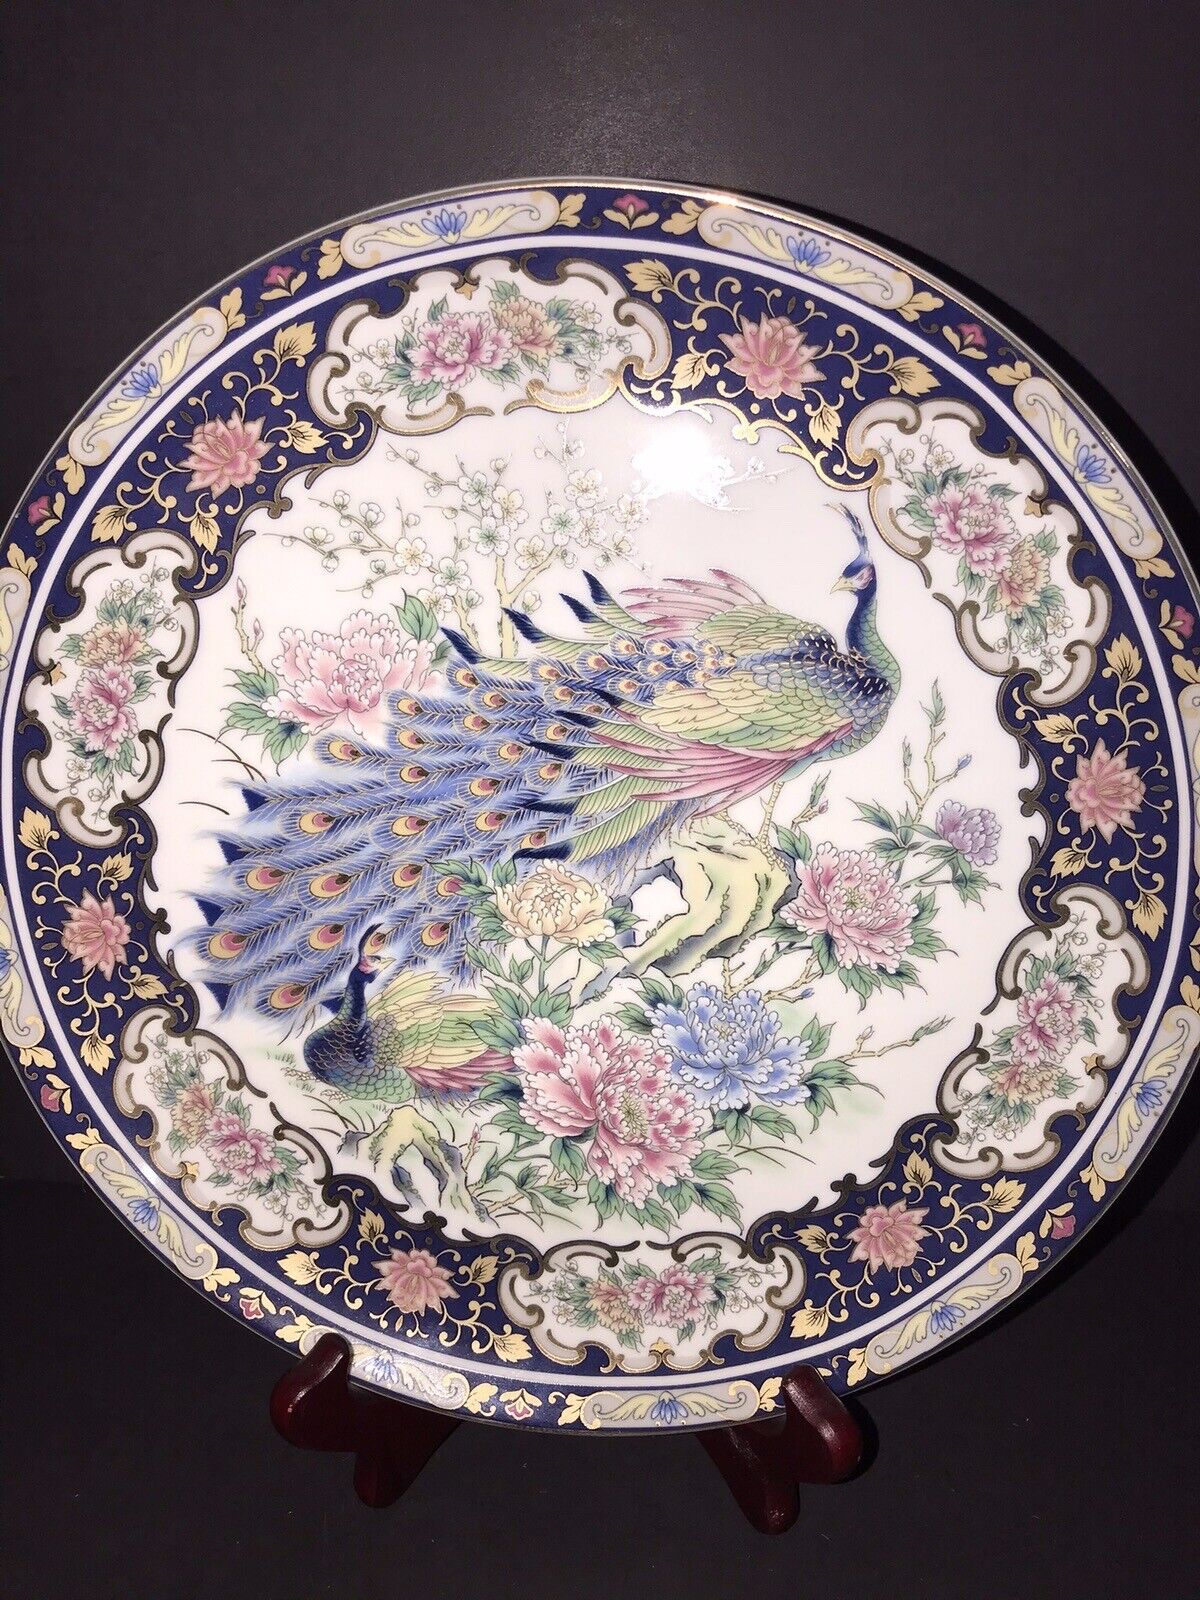 Stunning Colorful Peacock Decorative Floral Plate  10” Japan